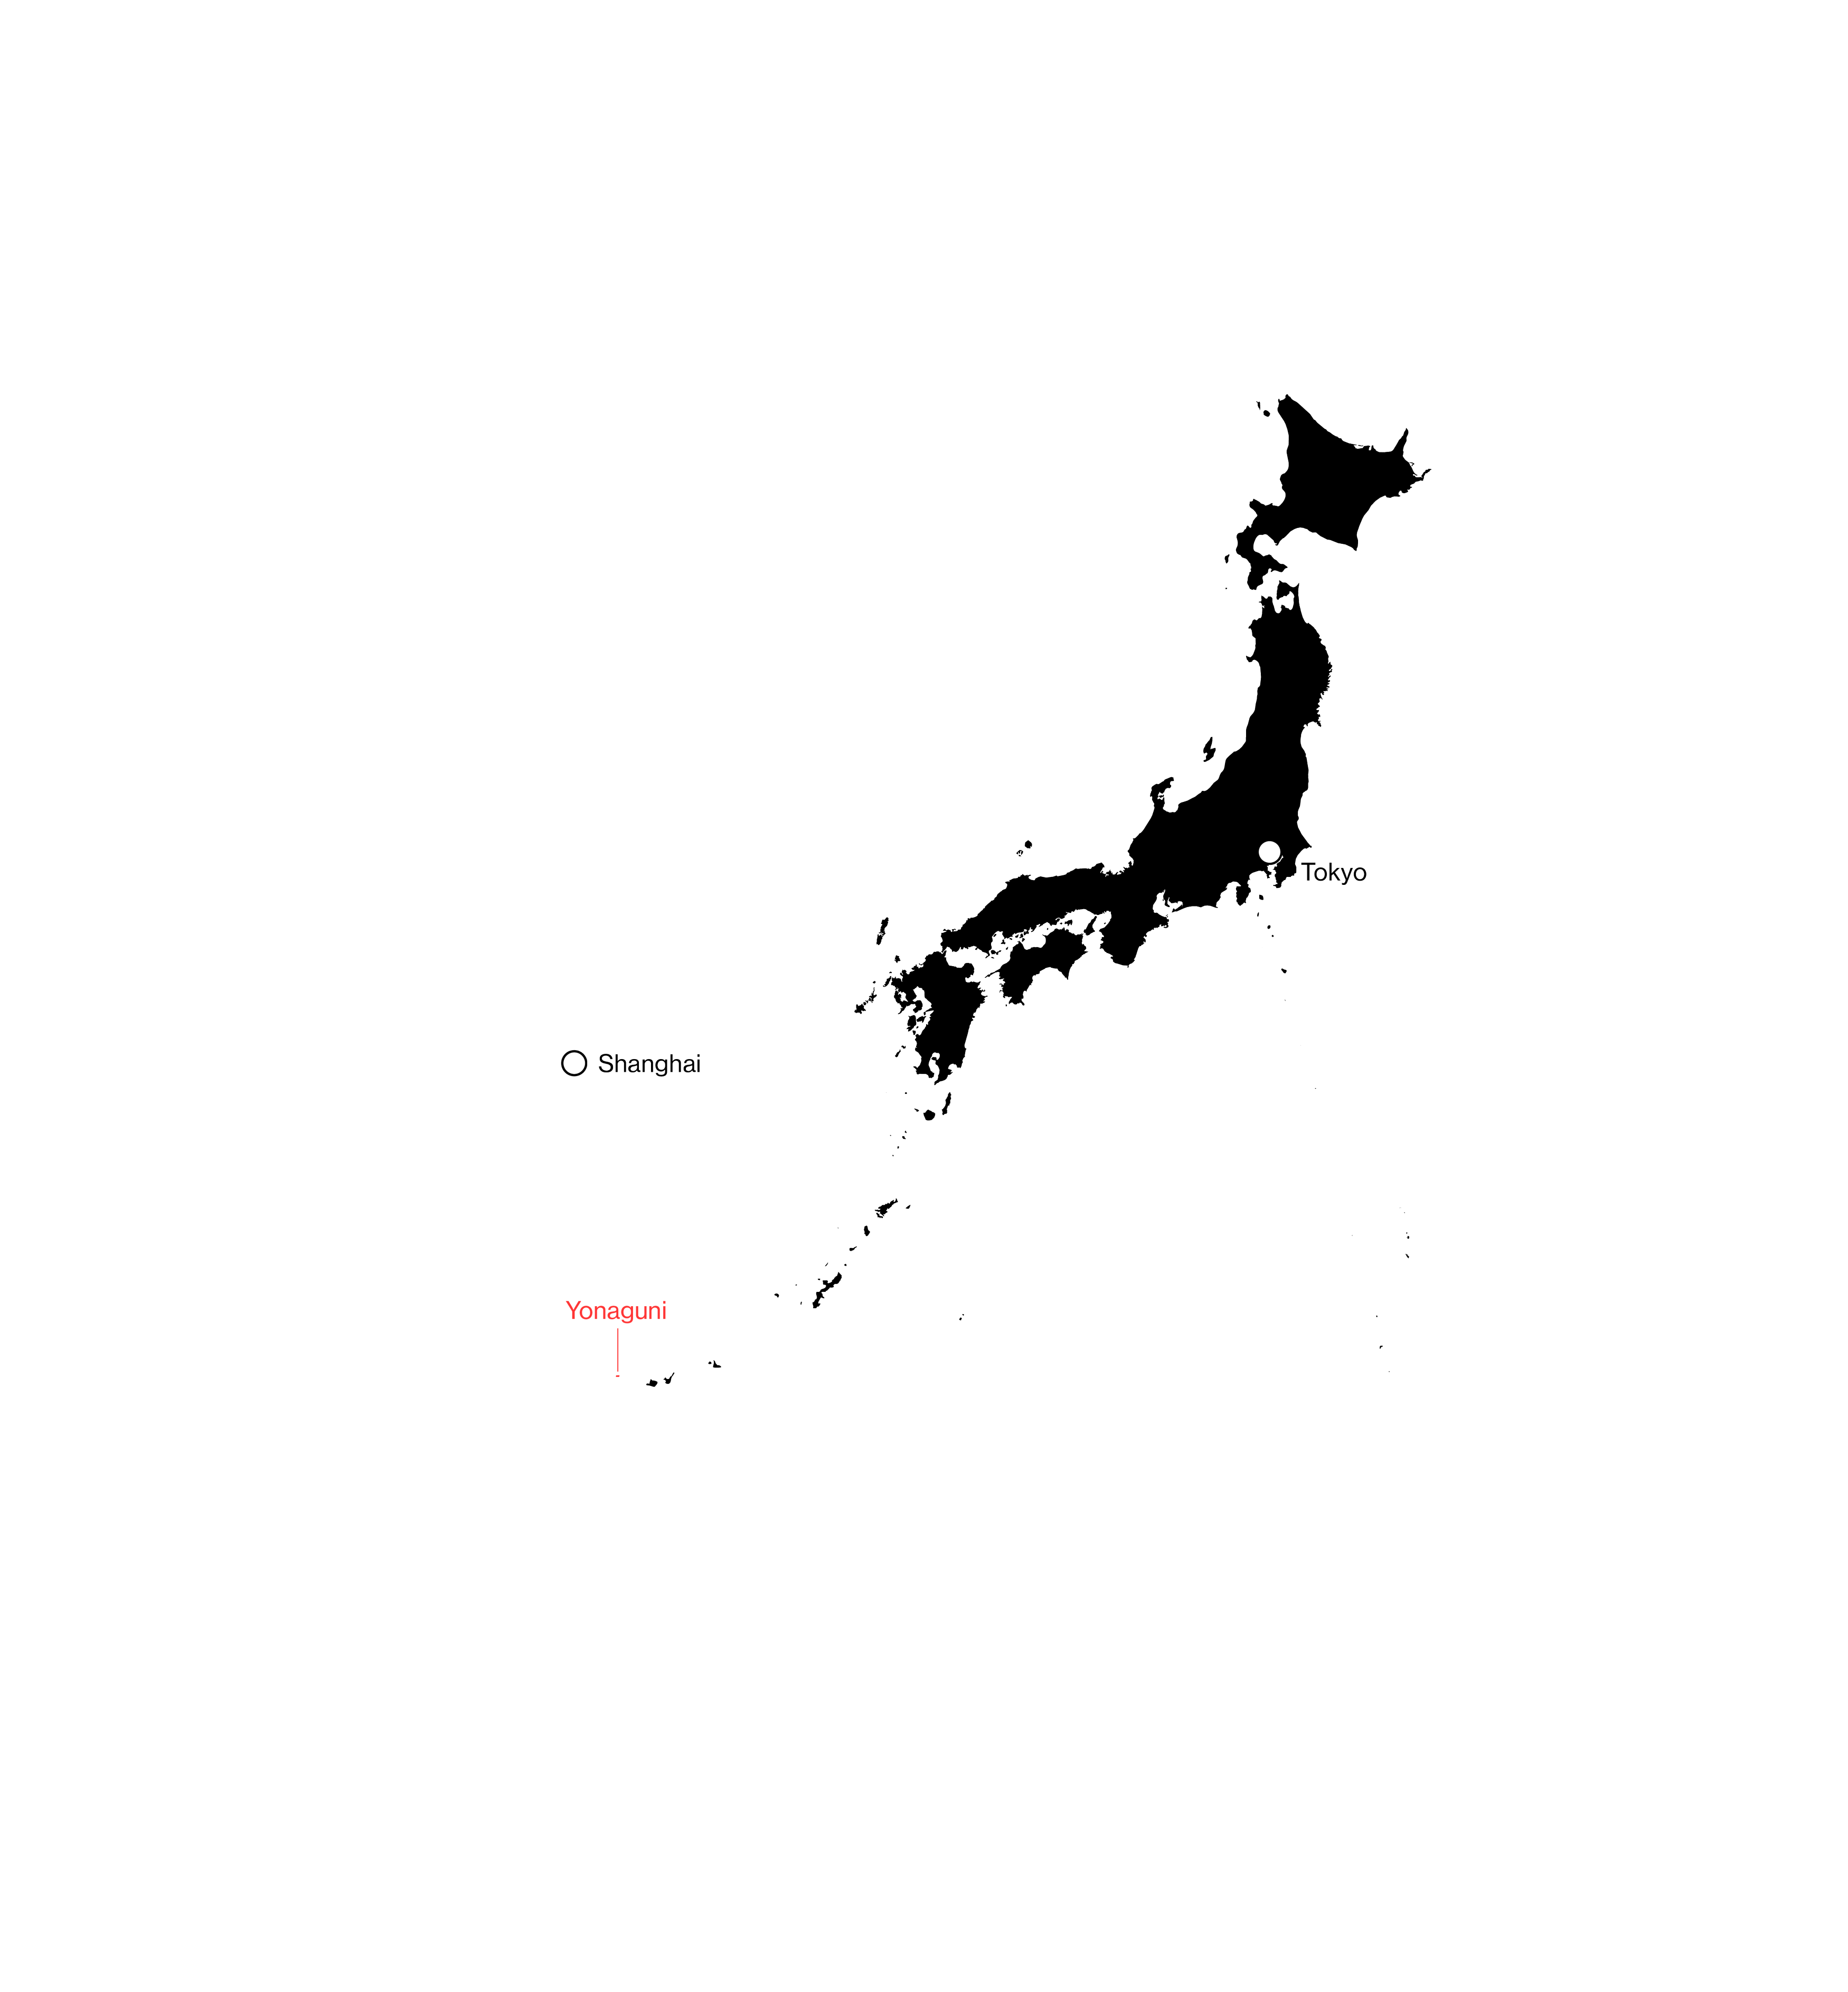 Map showing the Japanese island of Yonaguni, in proximity to Shanghai, China.